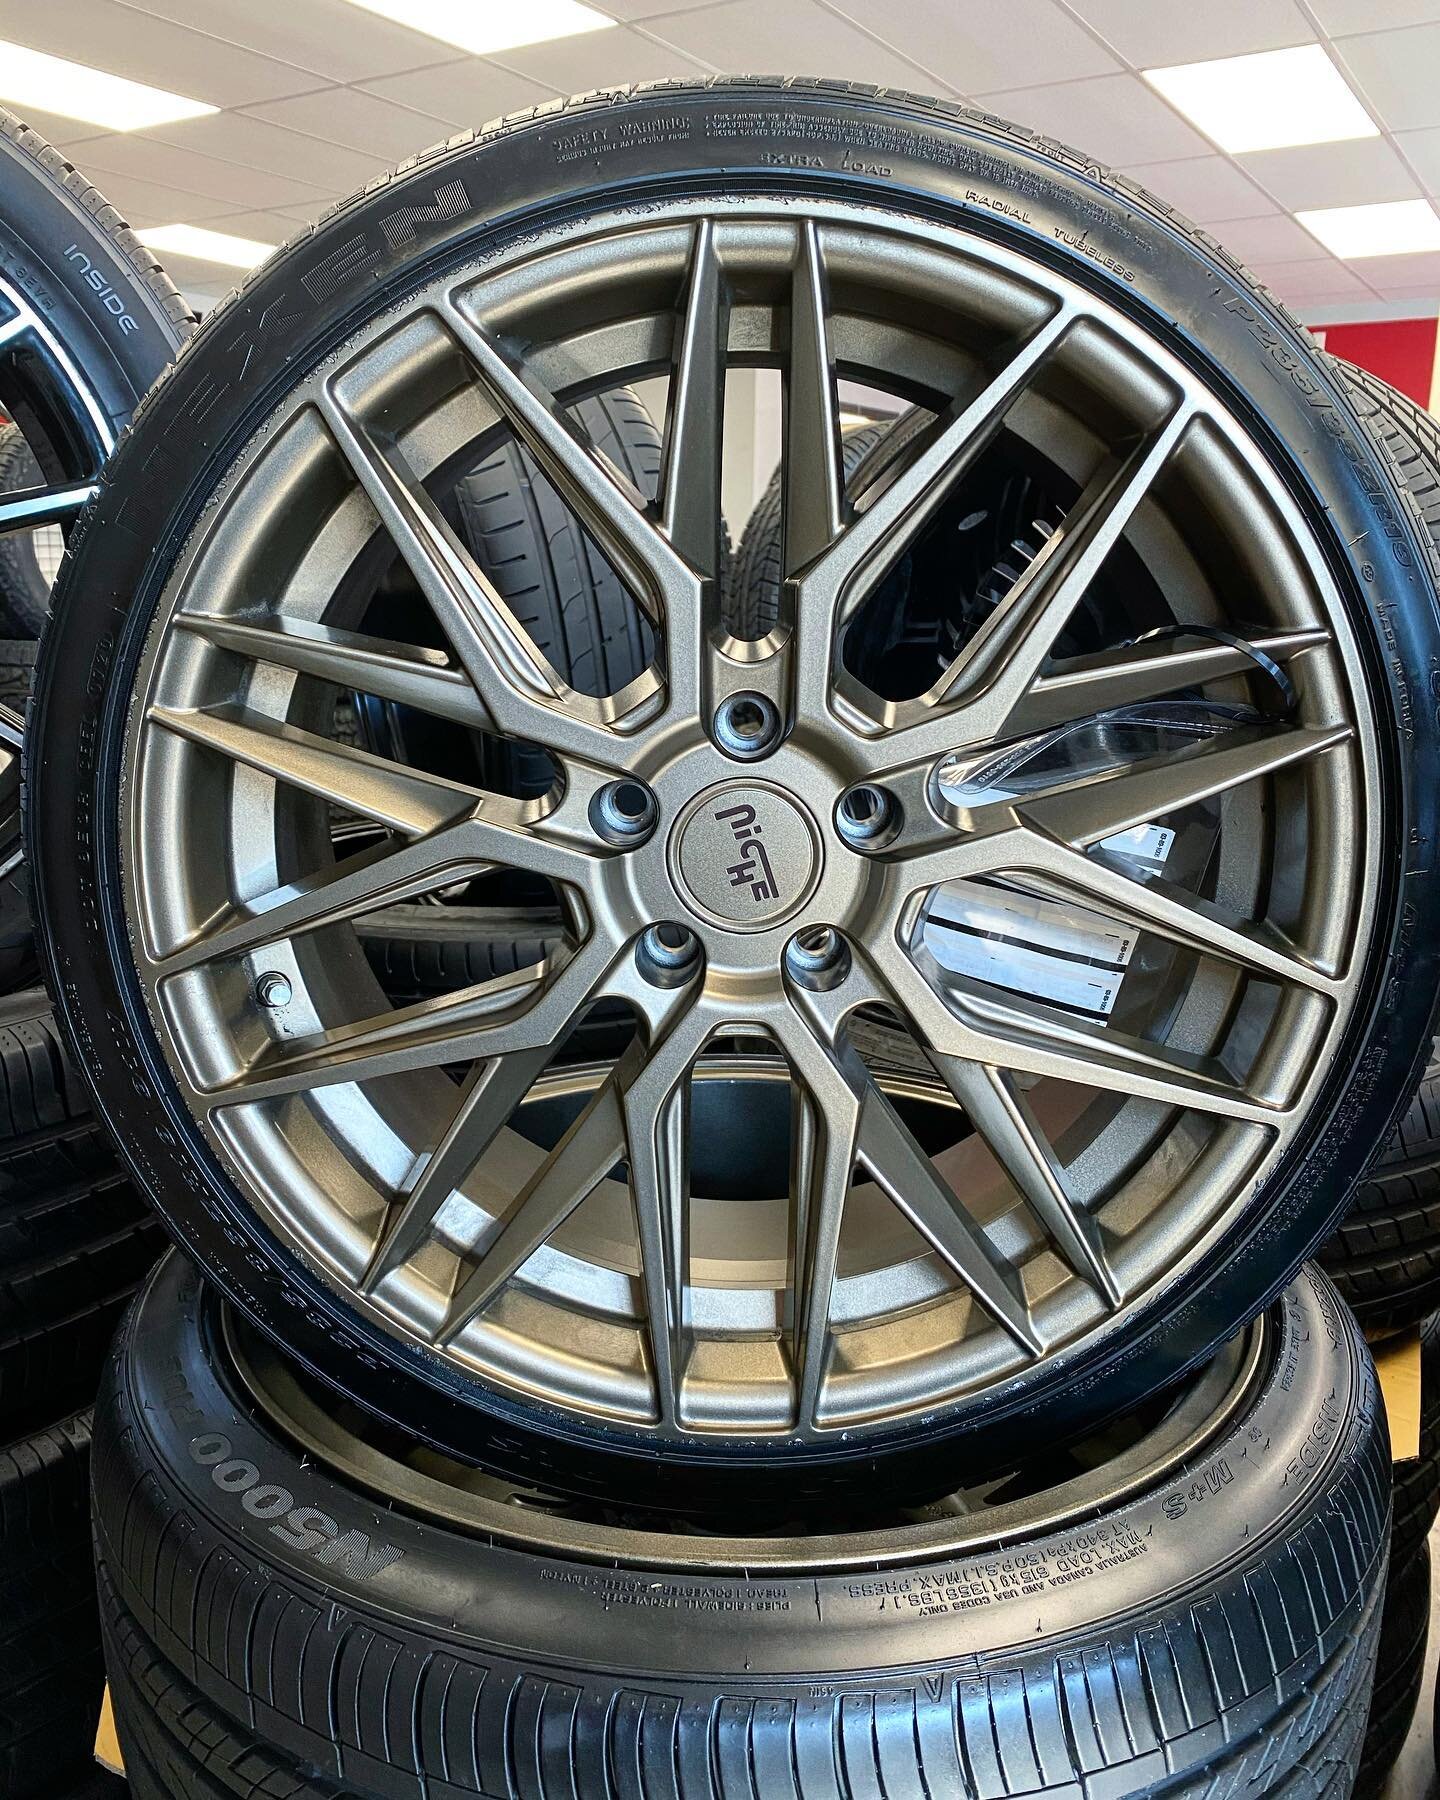 Check out this nice bronze set we have in store! Mention this post to the salesmen at the front for a special discount! 
.
.
.
.
.
.
.
.
.
#nichewheels #nicherims #nexentires #nexen #usedtires #newtires #wheelsandtires #financingavailable #spanish #n